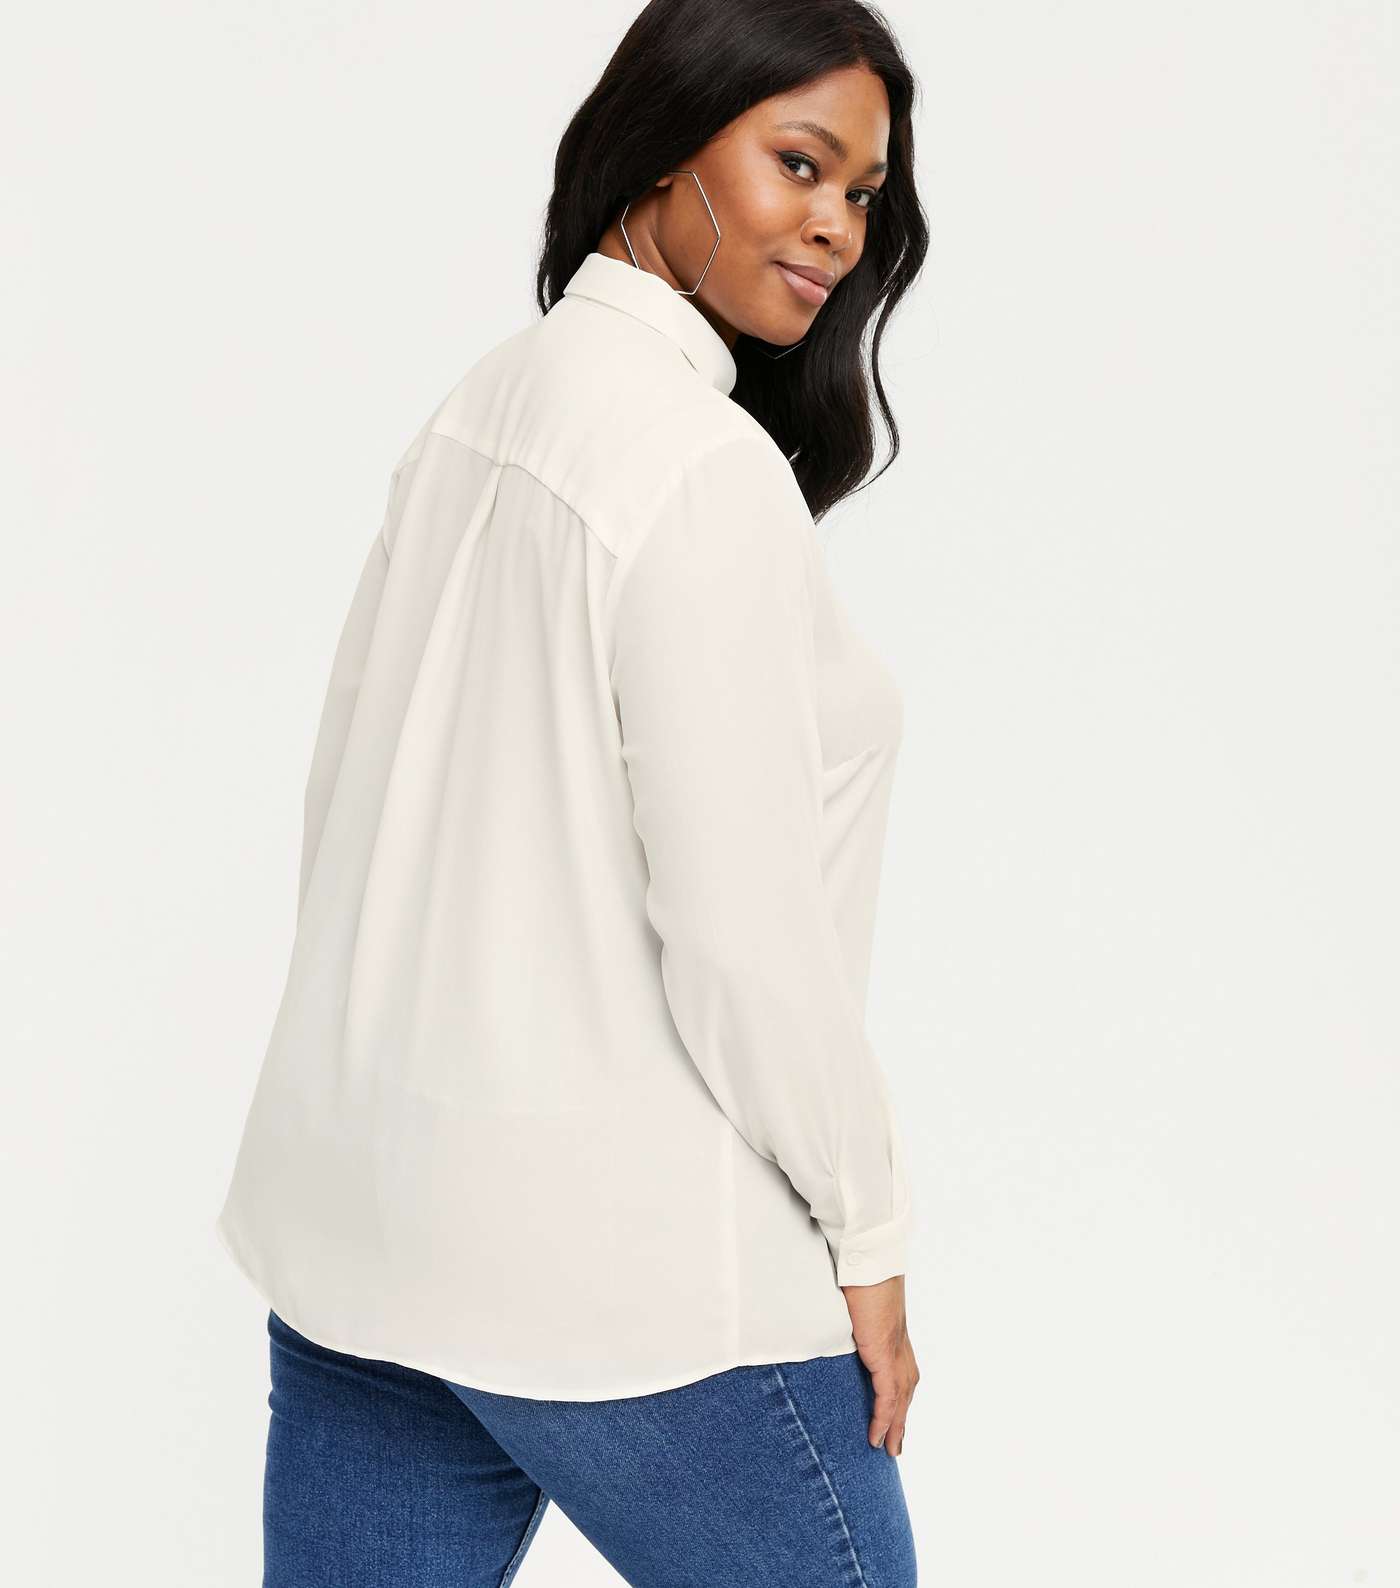 Curves White Collared Long Sleeve Shirt Image 3